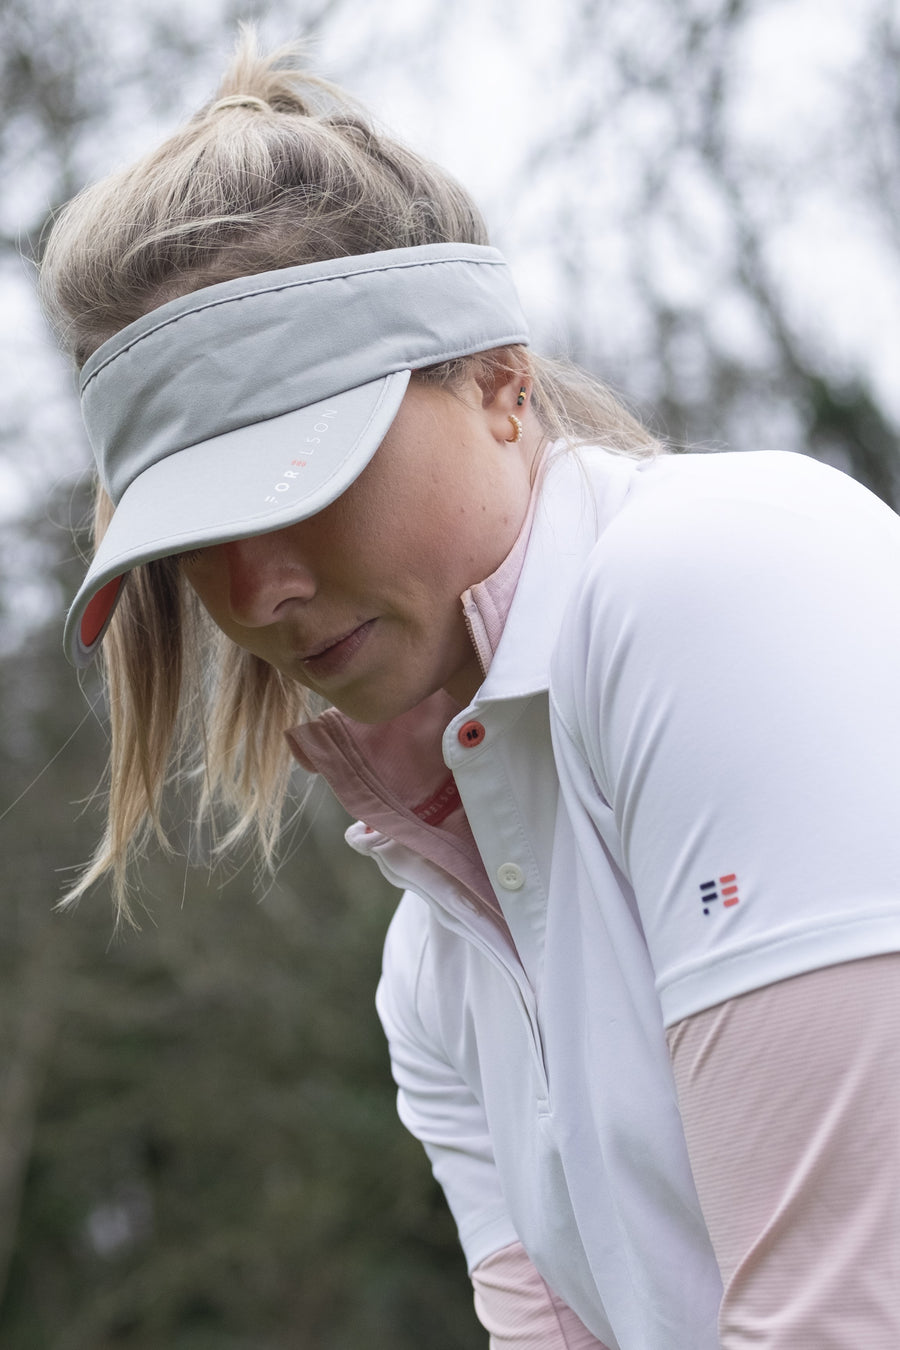 Women's white golf polo shirt. Lightweight breathable fabric.